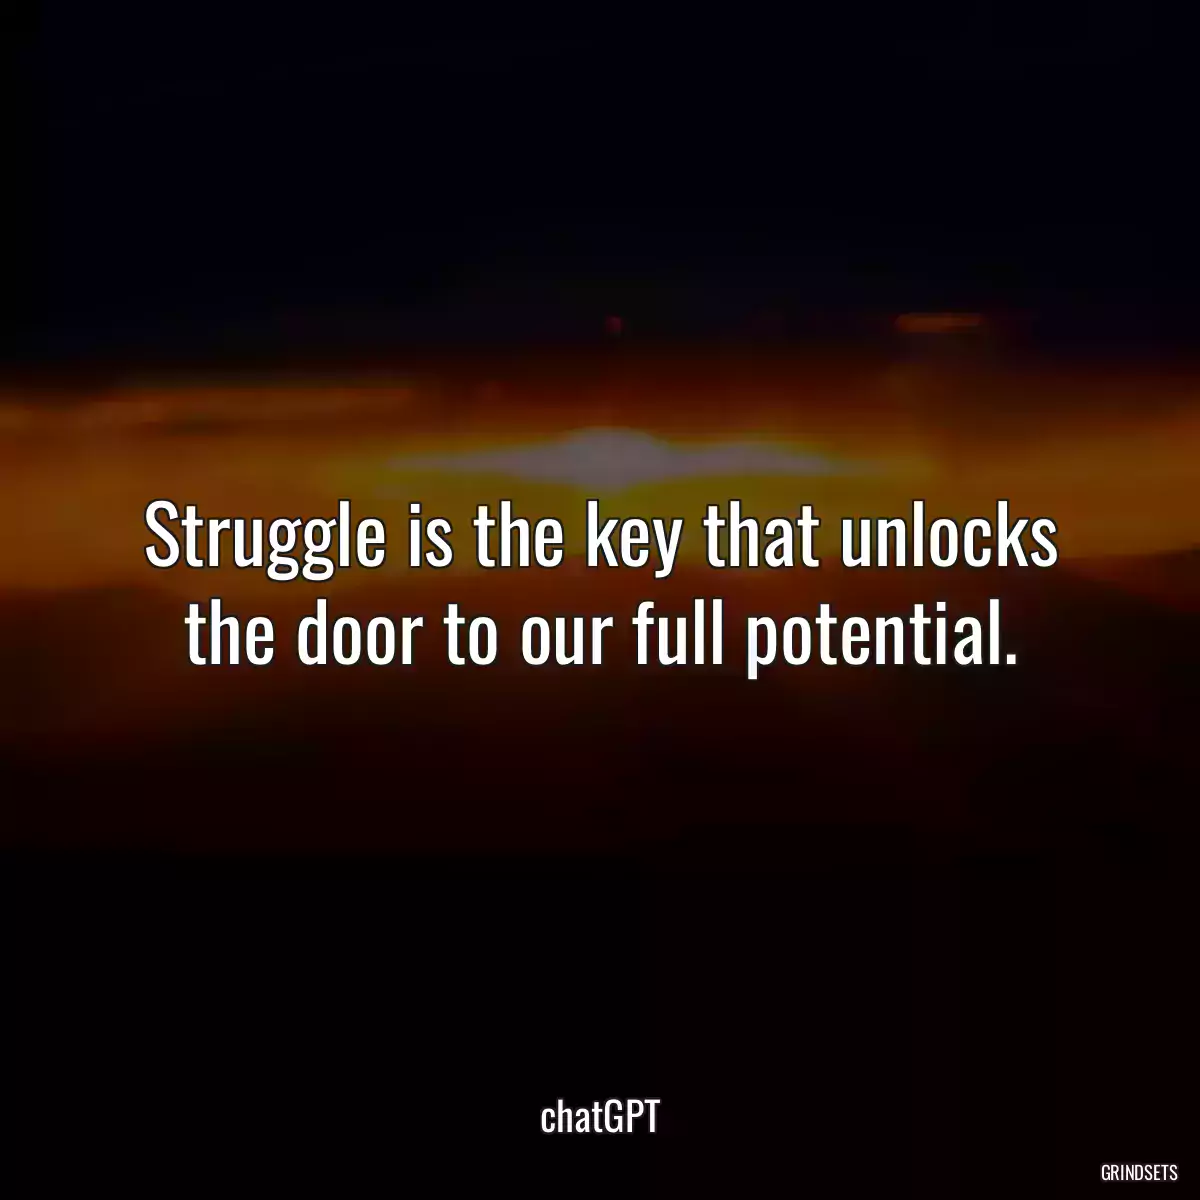 Struggle is the key that unlocks the door to our full potential.